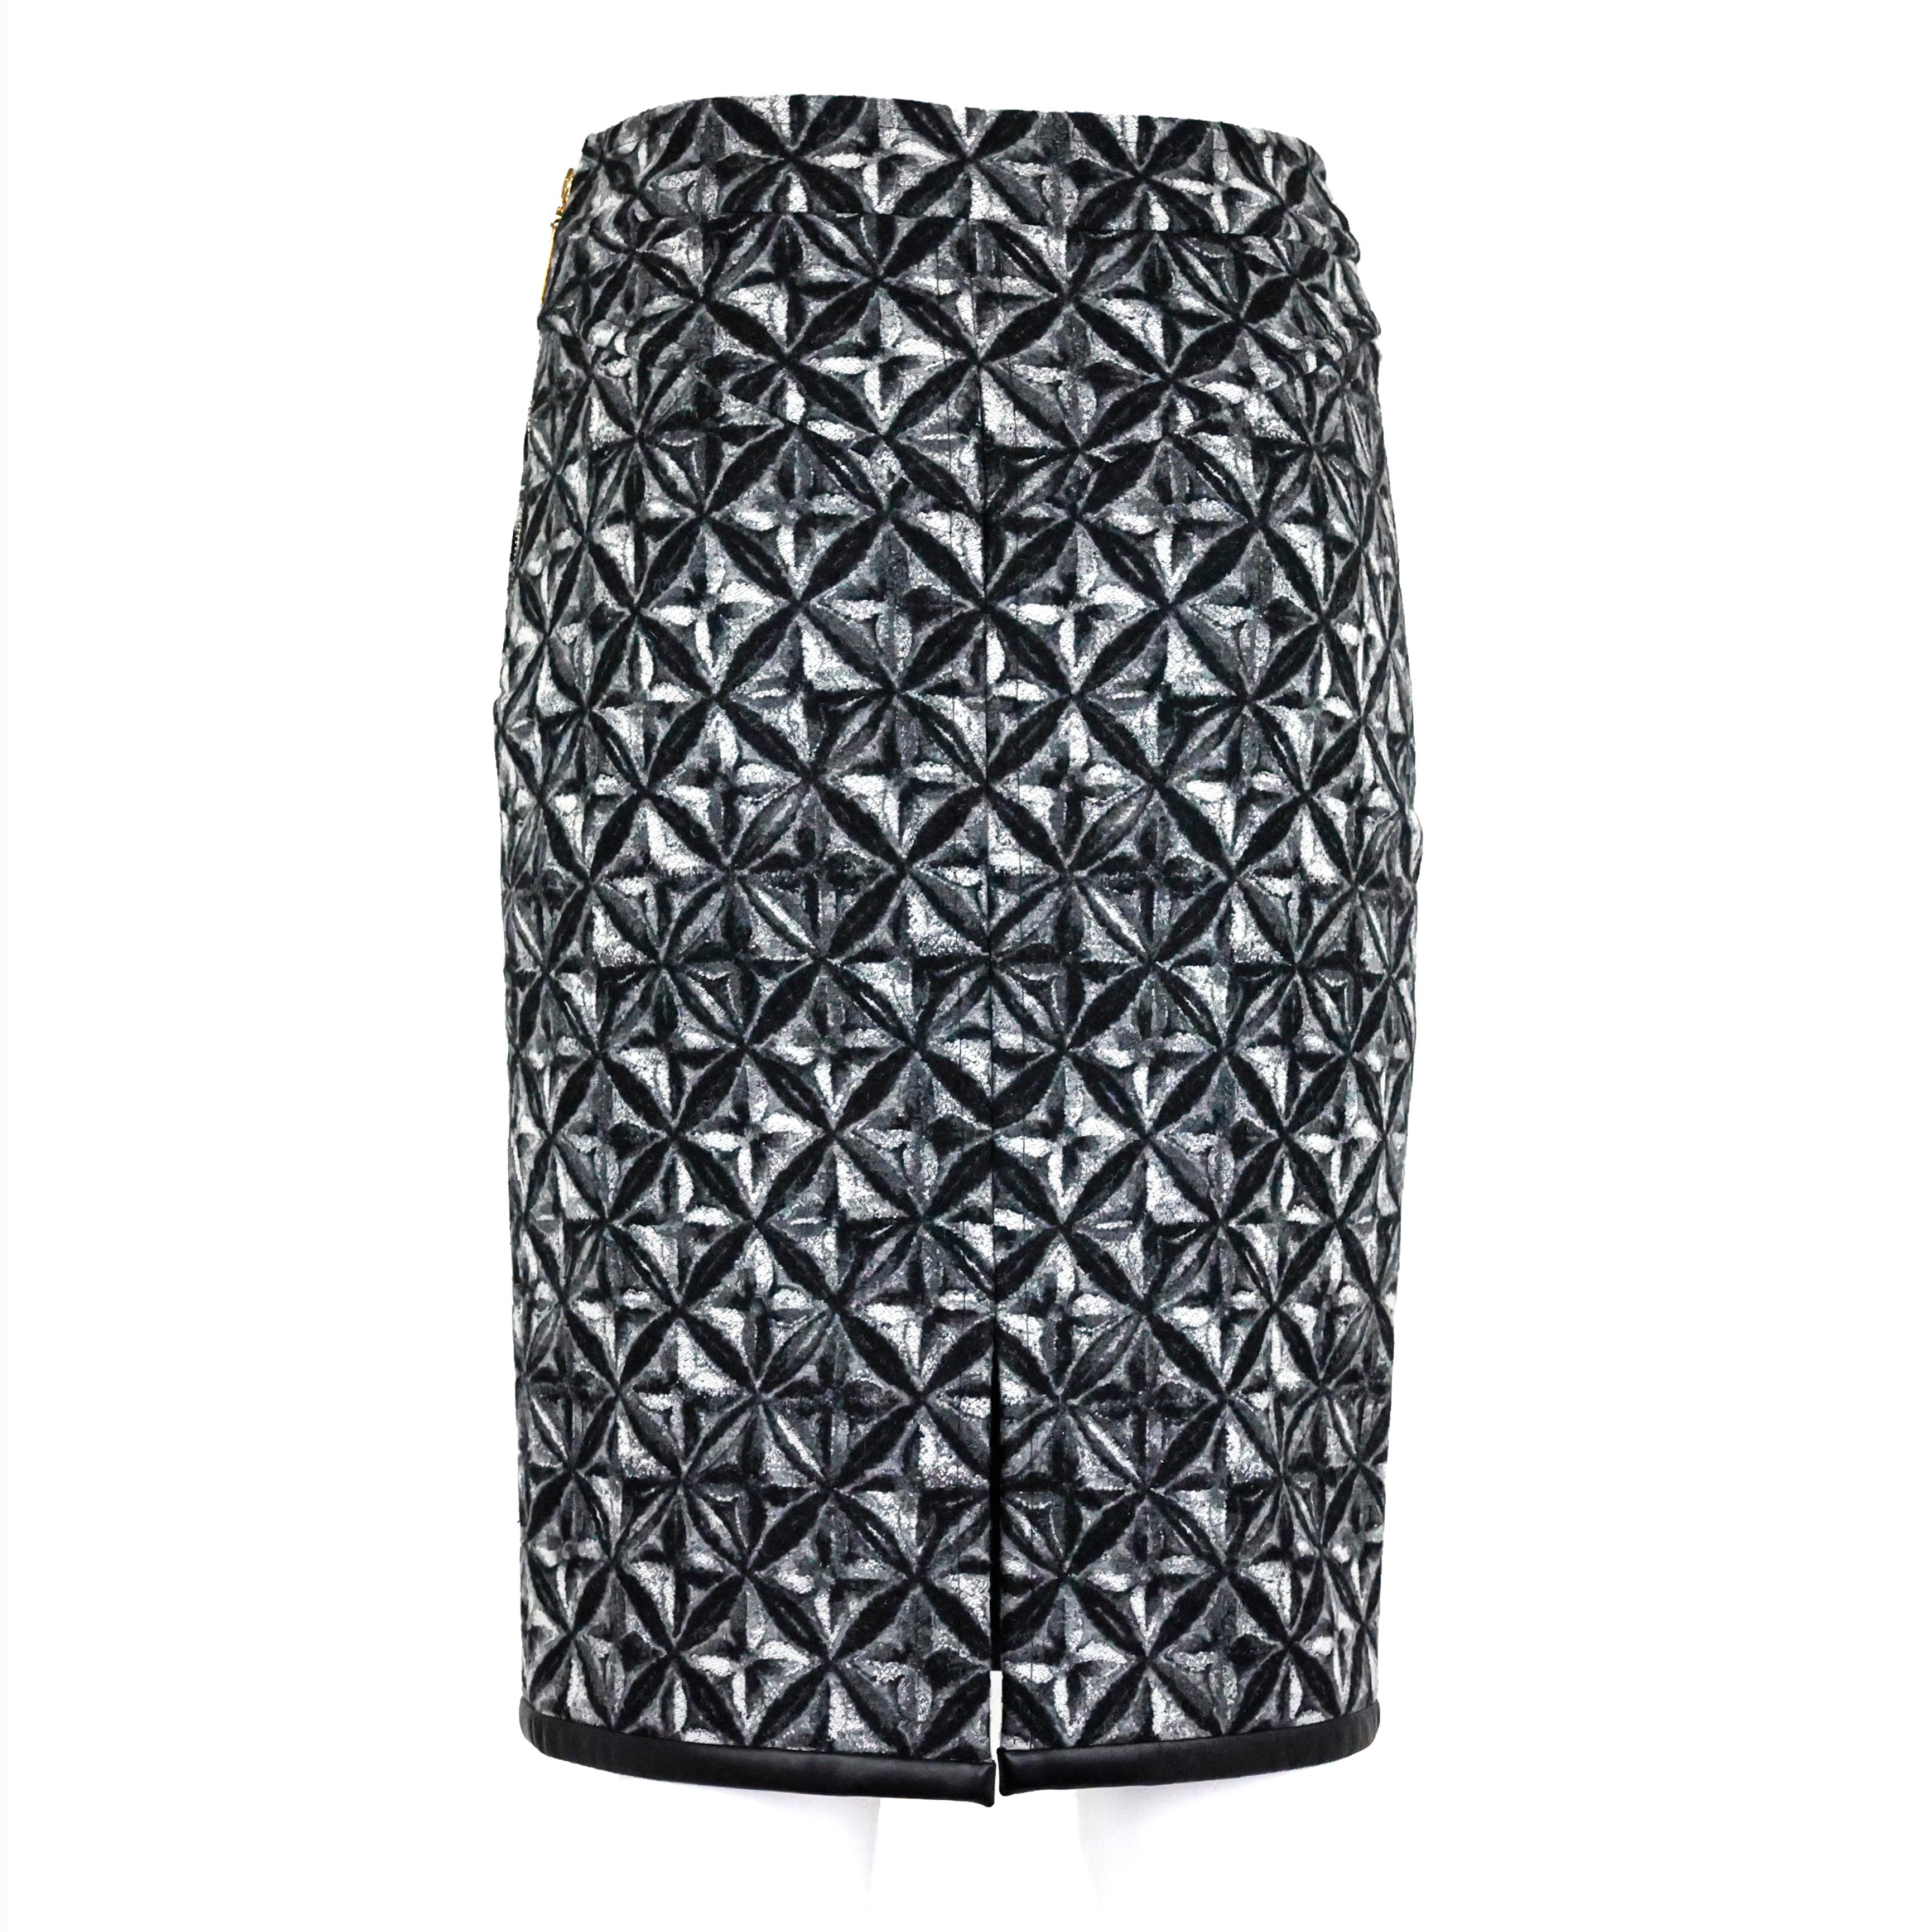 Louis Vuitton mid-length black and white monogram wool and leather skirt. Size 34 FR.

Condition:
Excellent.